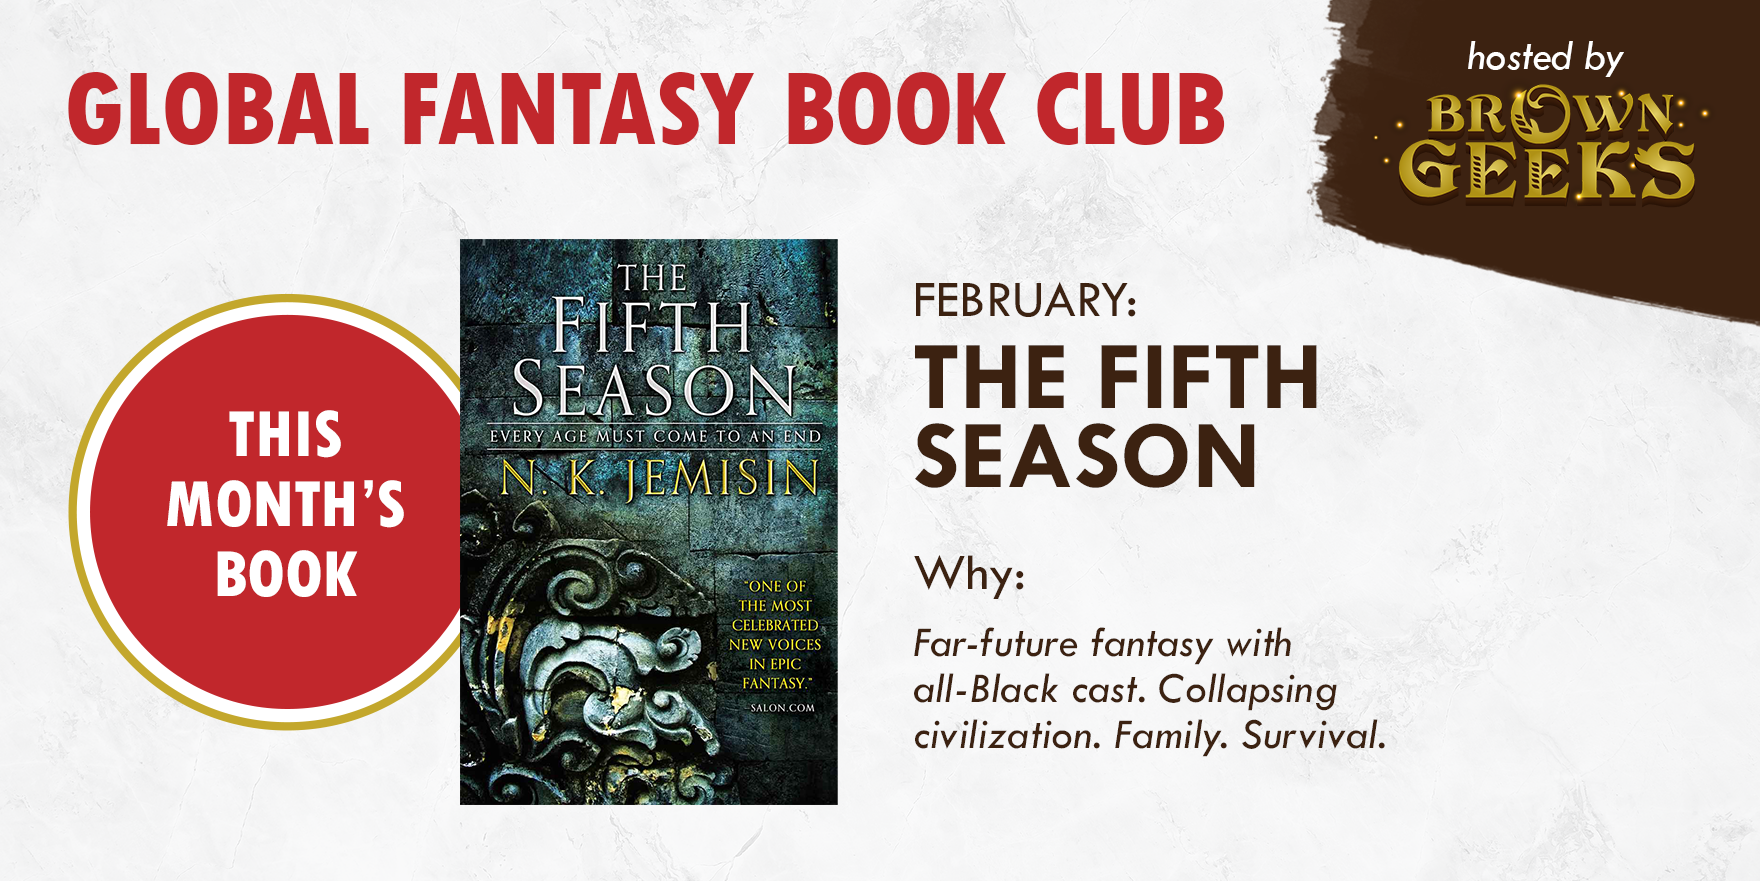 Global Fantasy Book Club, hosted by Brown Geeks. This month's book: The Fifth Season by N.K. Jemisin.